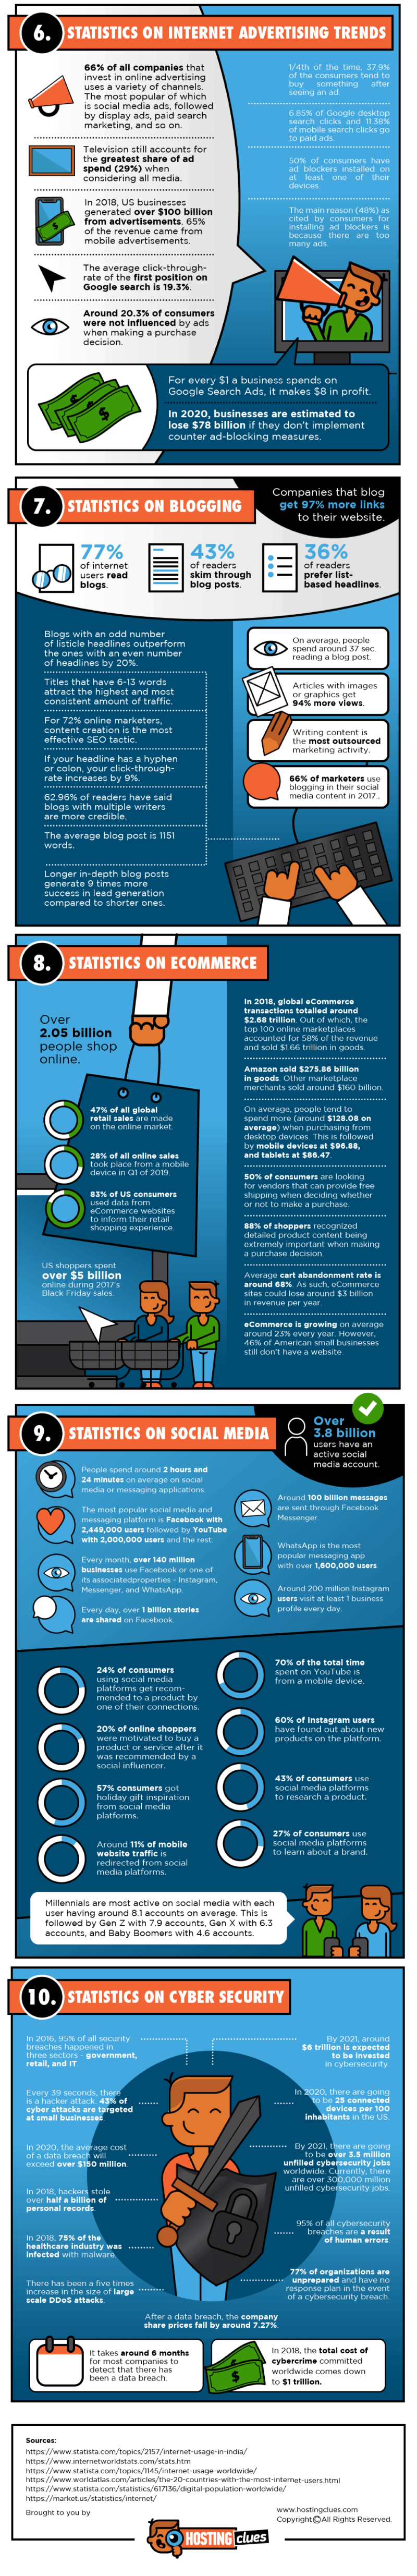 Statistics and Facts Infographic 2 100+ Statistics and Facts to Give You an In-depth Look of The Internet in 2022